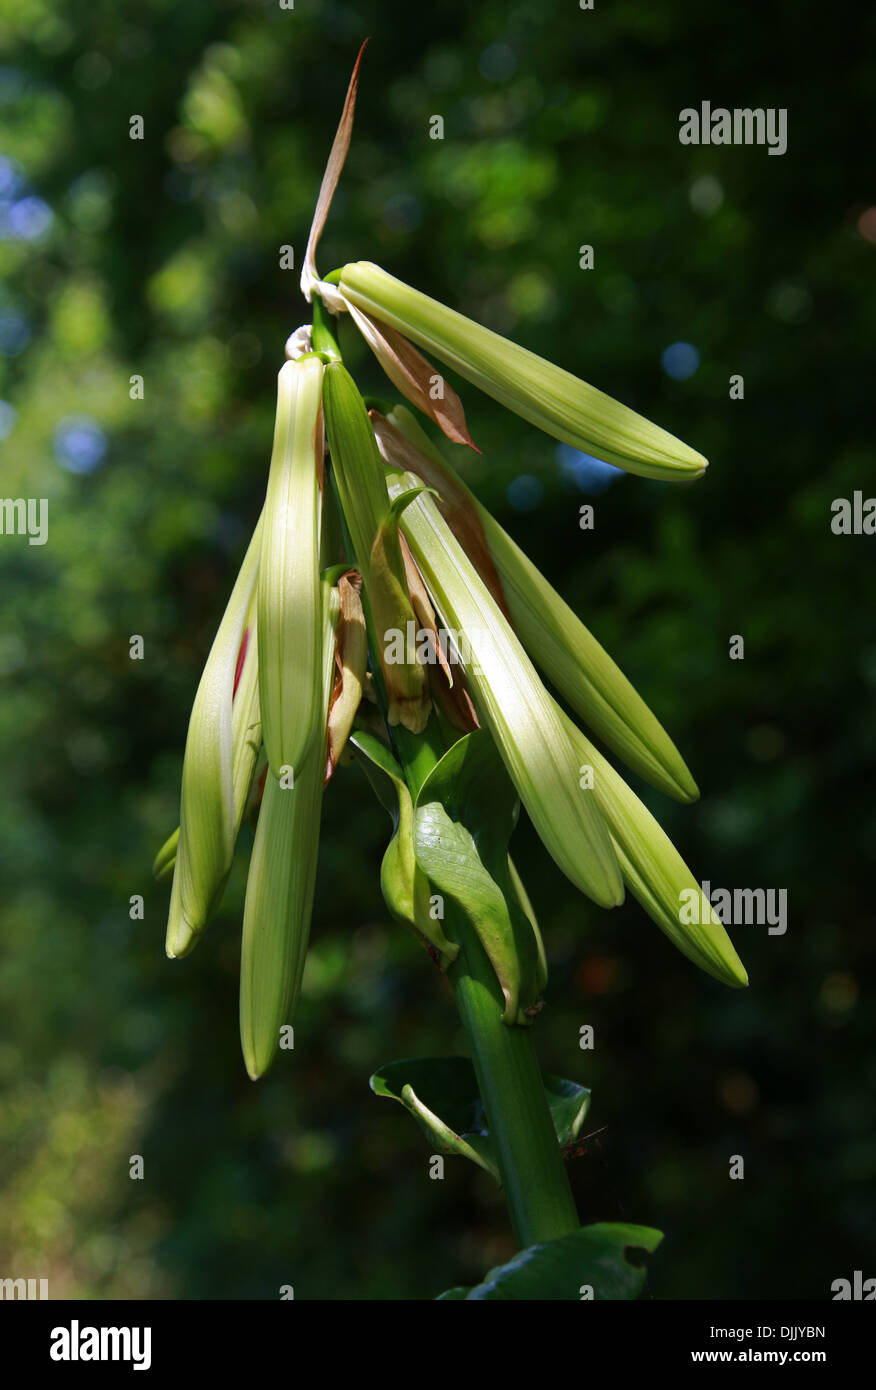 Giant Himalayan Lily, Cardiocrinum giganteum, Liliaceae. Forest Glades in the Himalayas, Japan and China. Stock Photo